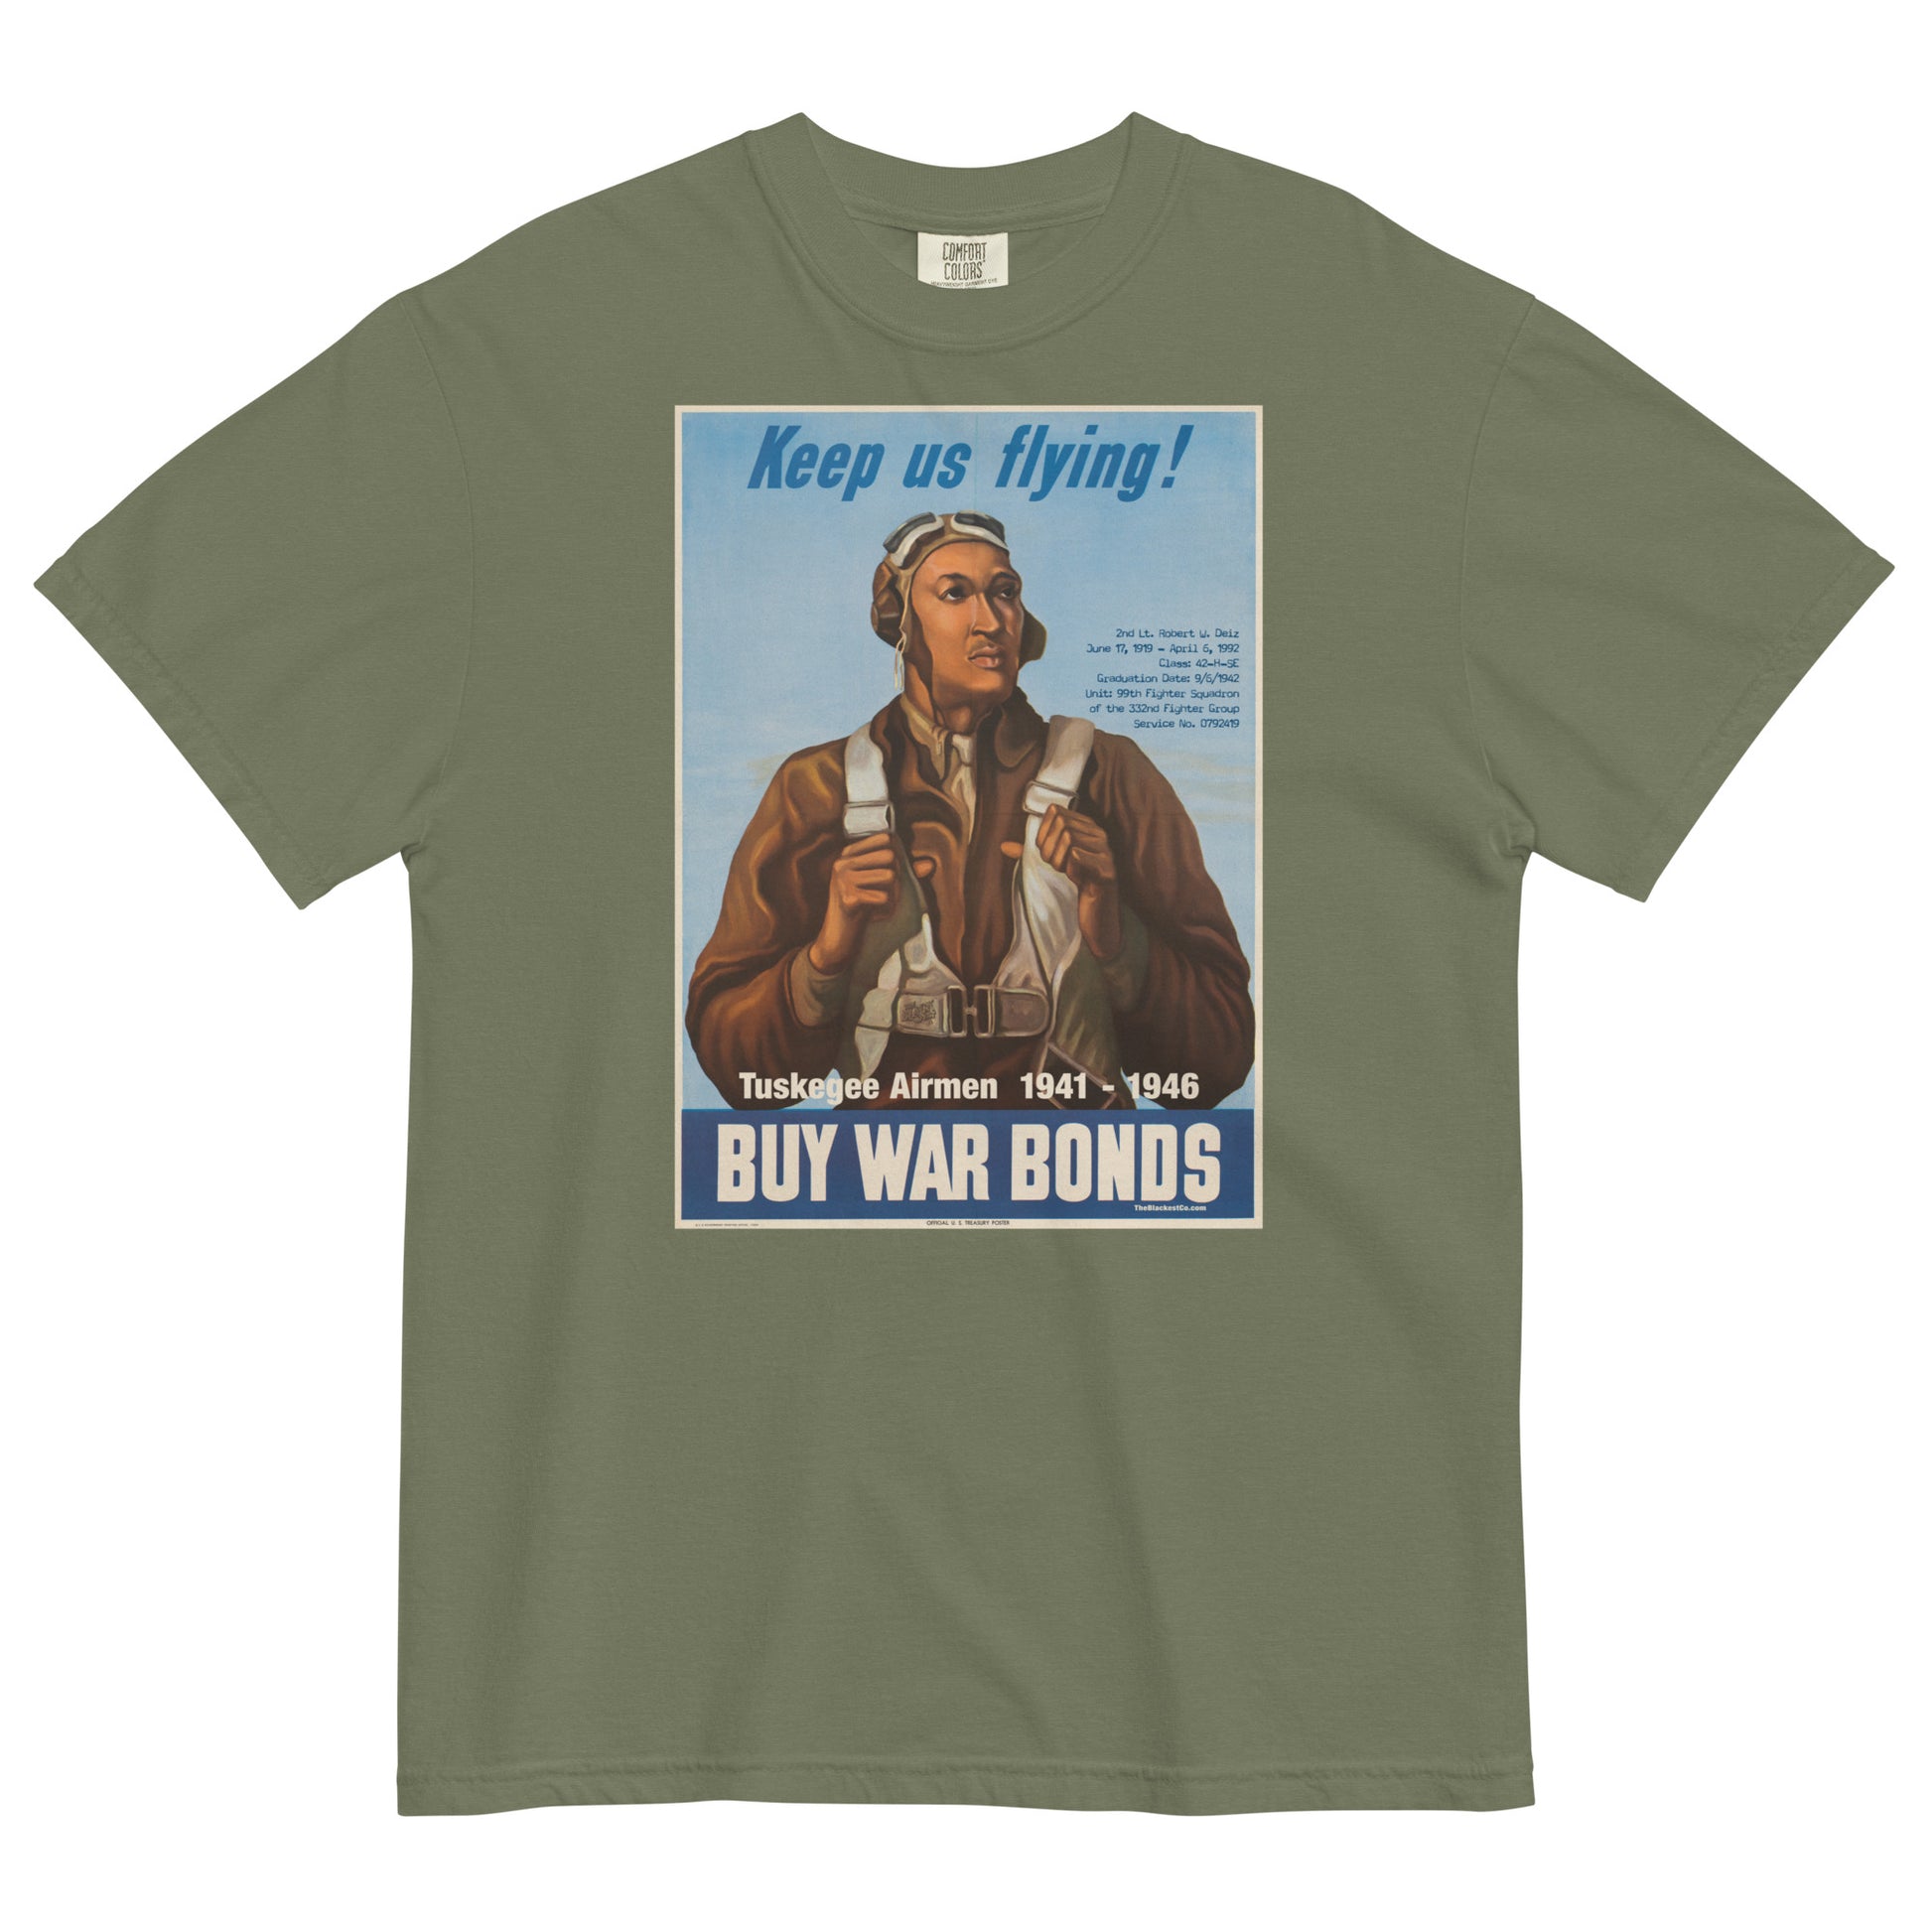 army green t shirt with the image of an african american wwii pilot and tuskegee airmen written on it